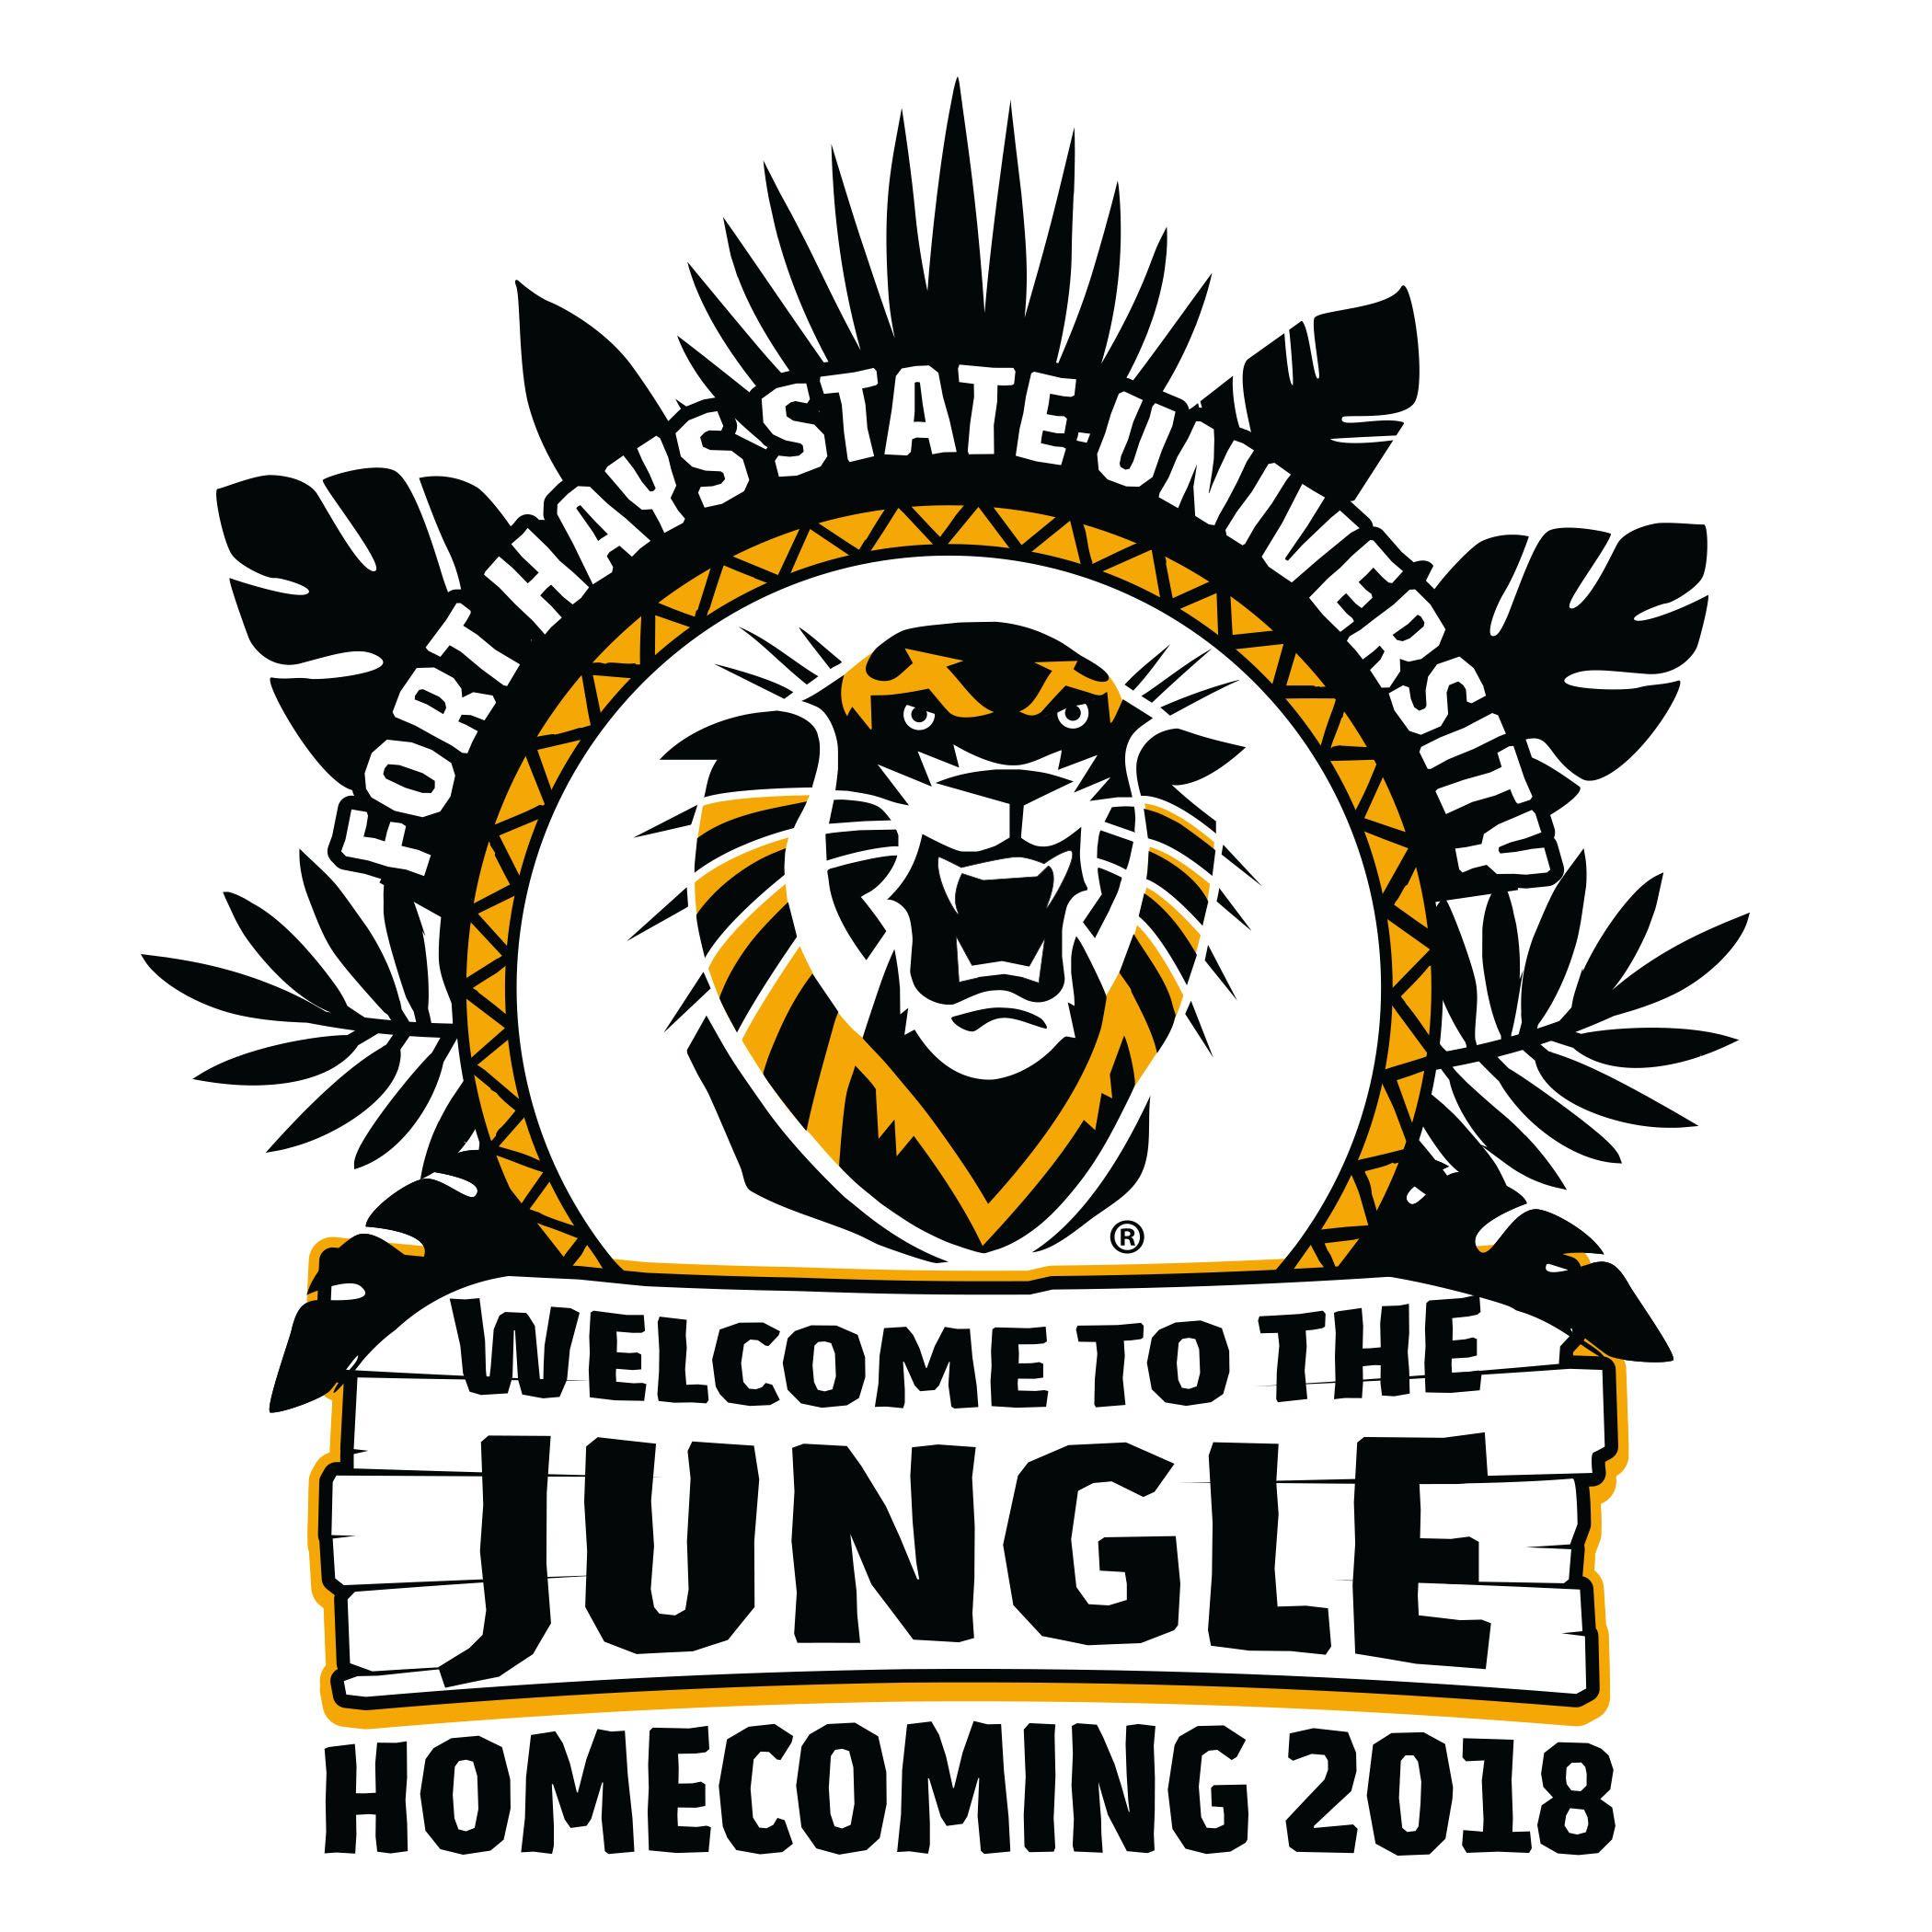 FHSU Logo - Theme announced for Fort Hays State University Homecoming 2018